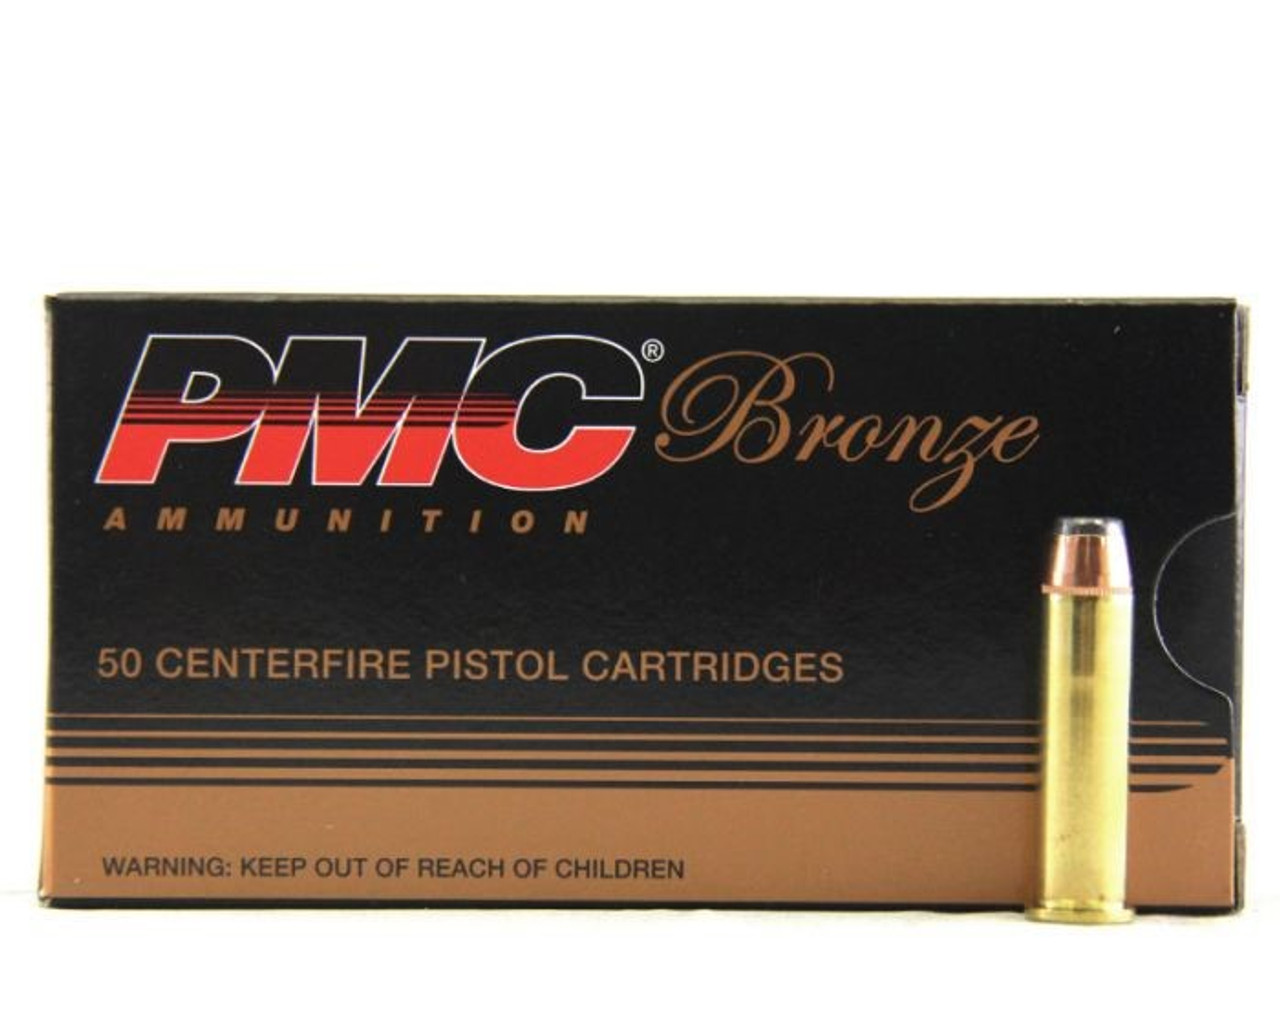 PMC Bronze Ammunition

PMC Bronze bridges a gap for target shooters or hunters who get genuine pleasure from challenging themselves, shot after shot, to become better marksman. Made of high quality ingredients, PMC Bronze is clean burning, brass cased, full metal jacket ammunition. 

Specifications:

Caliber: .357 Magnum
Weight: 158 Grain
Bullet Style: Jacketed Soft Point
Casing: Brass
Muzzle Velocity: 1471 fps
Muzzle Energy: 759 ft. lbs.
Part #: 357A